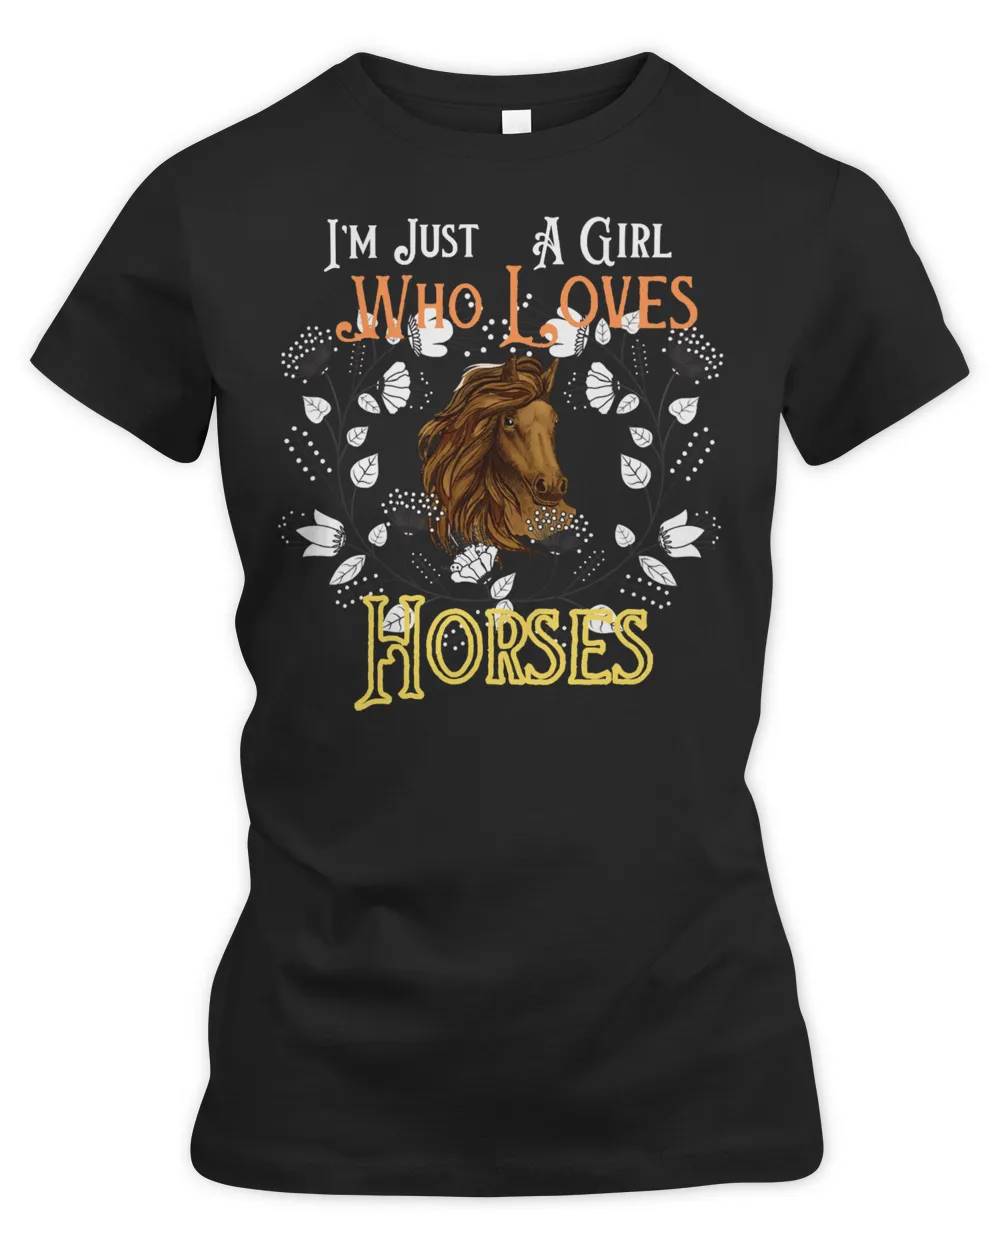 Horse Horses Equestrian Im Just A Girl Who Loves s Horse Rider